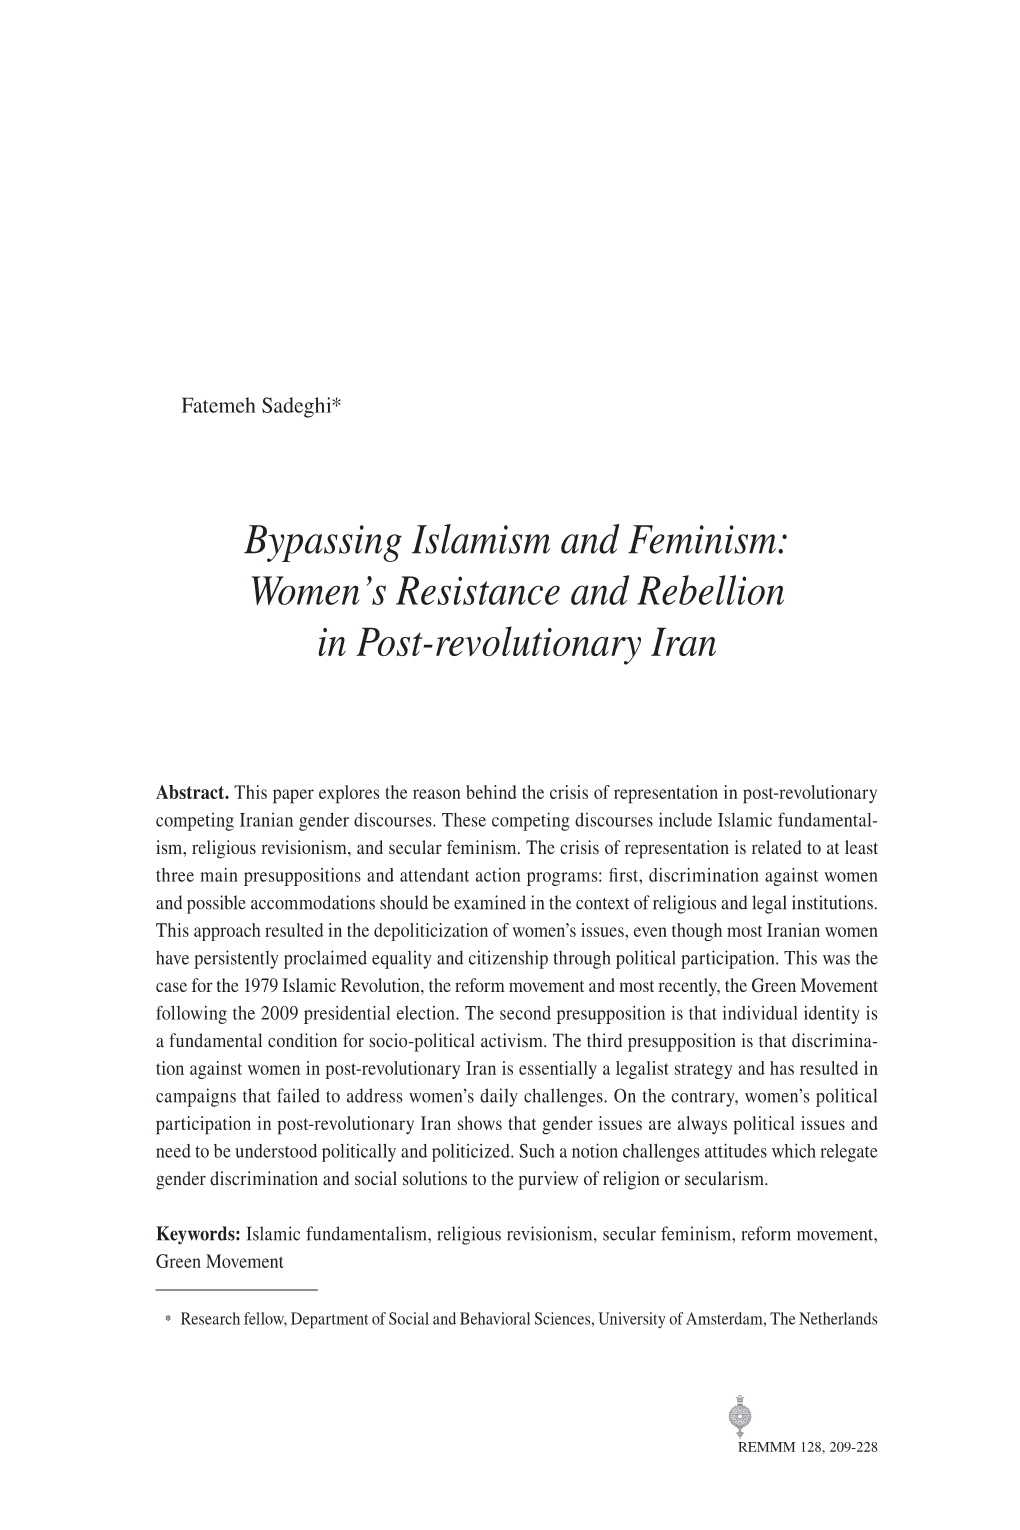 Bypassing Islamism and Feminism: Women's Resistance and Rebellion